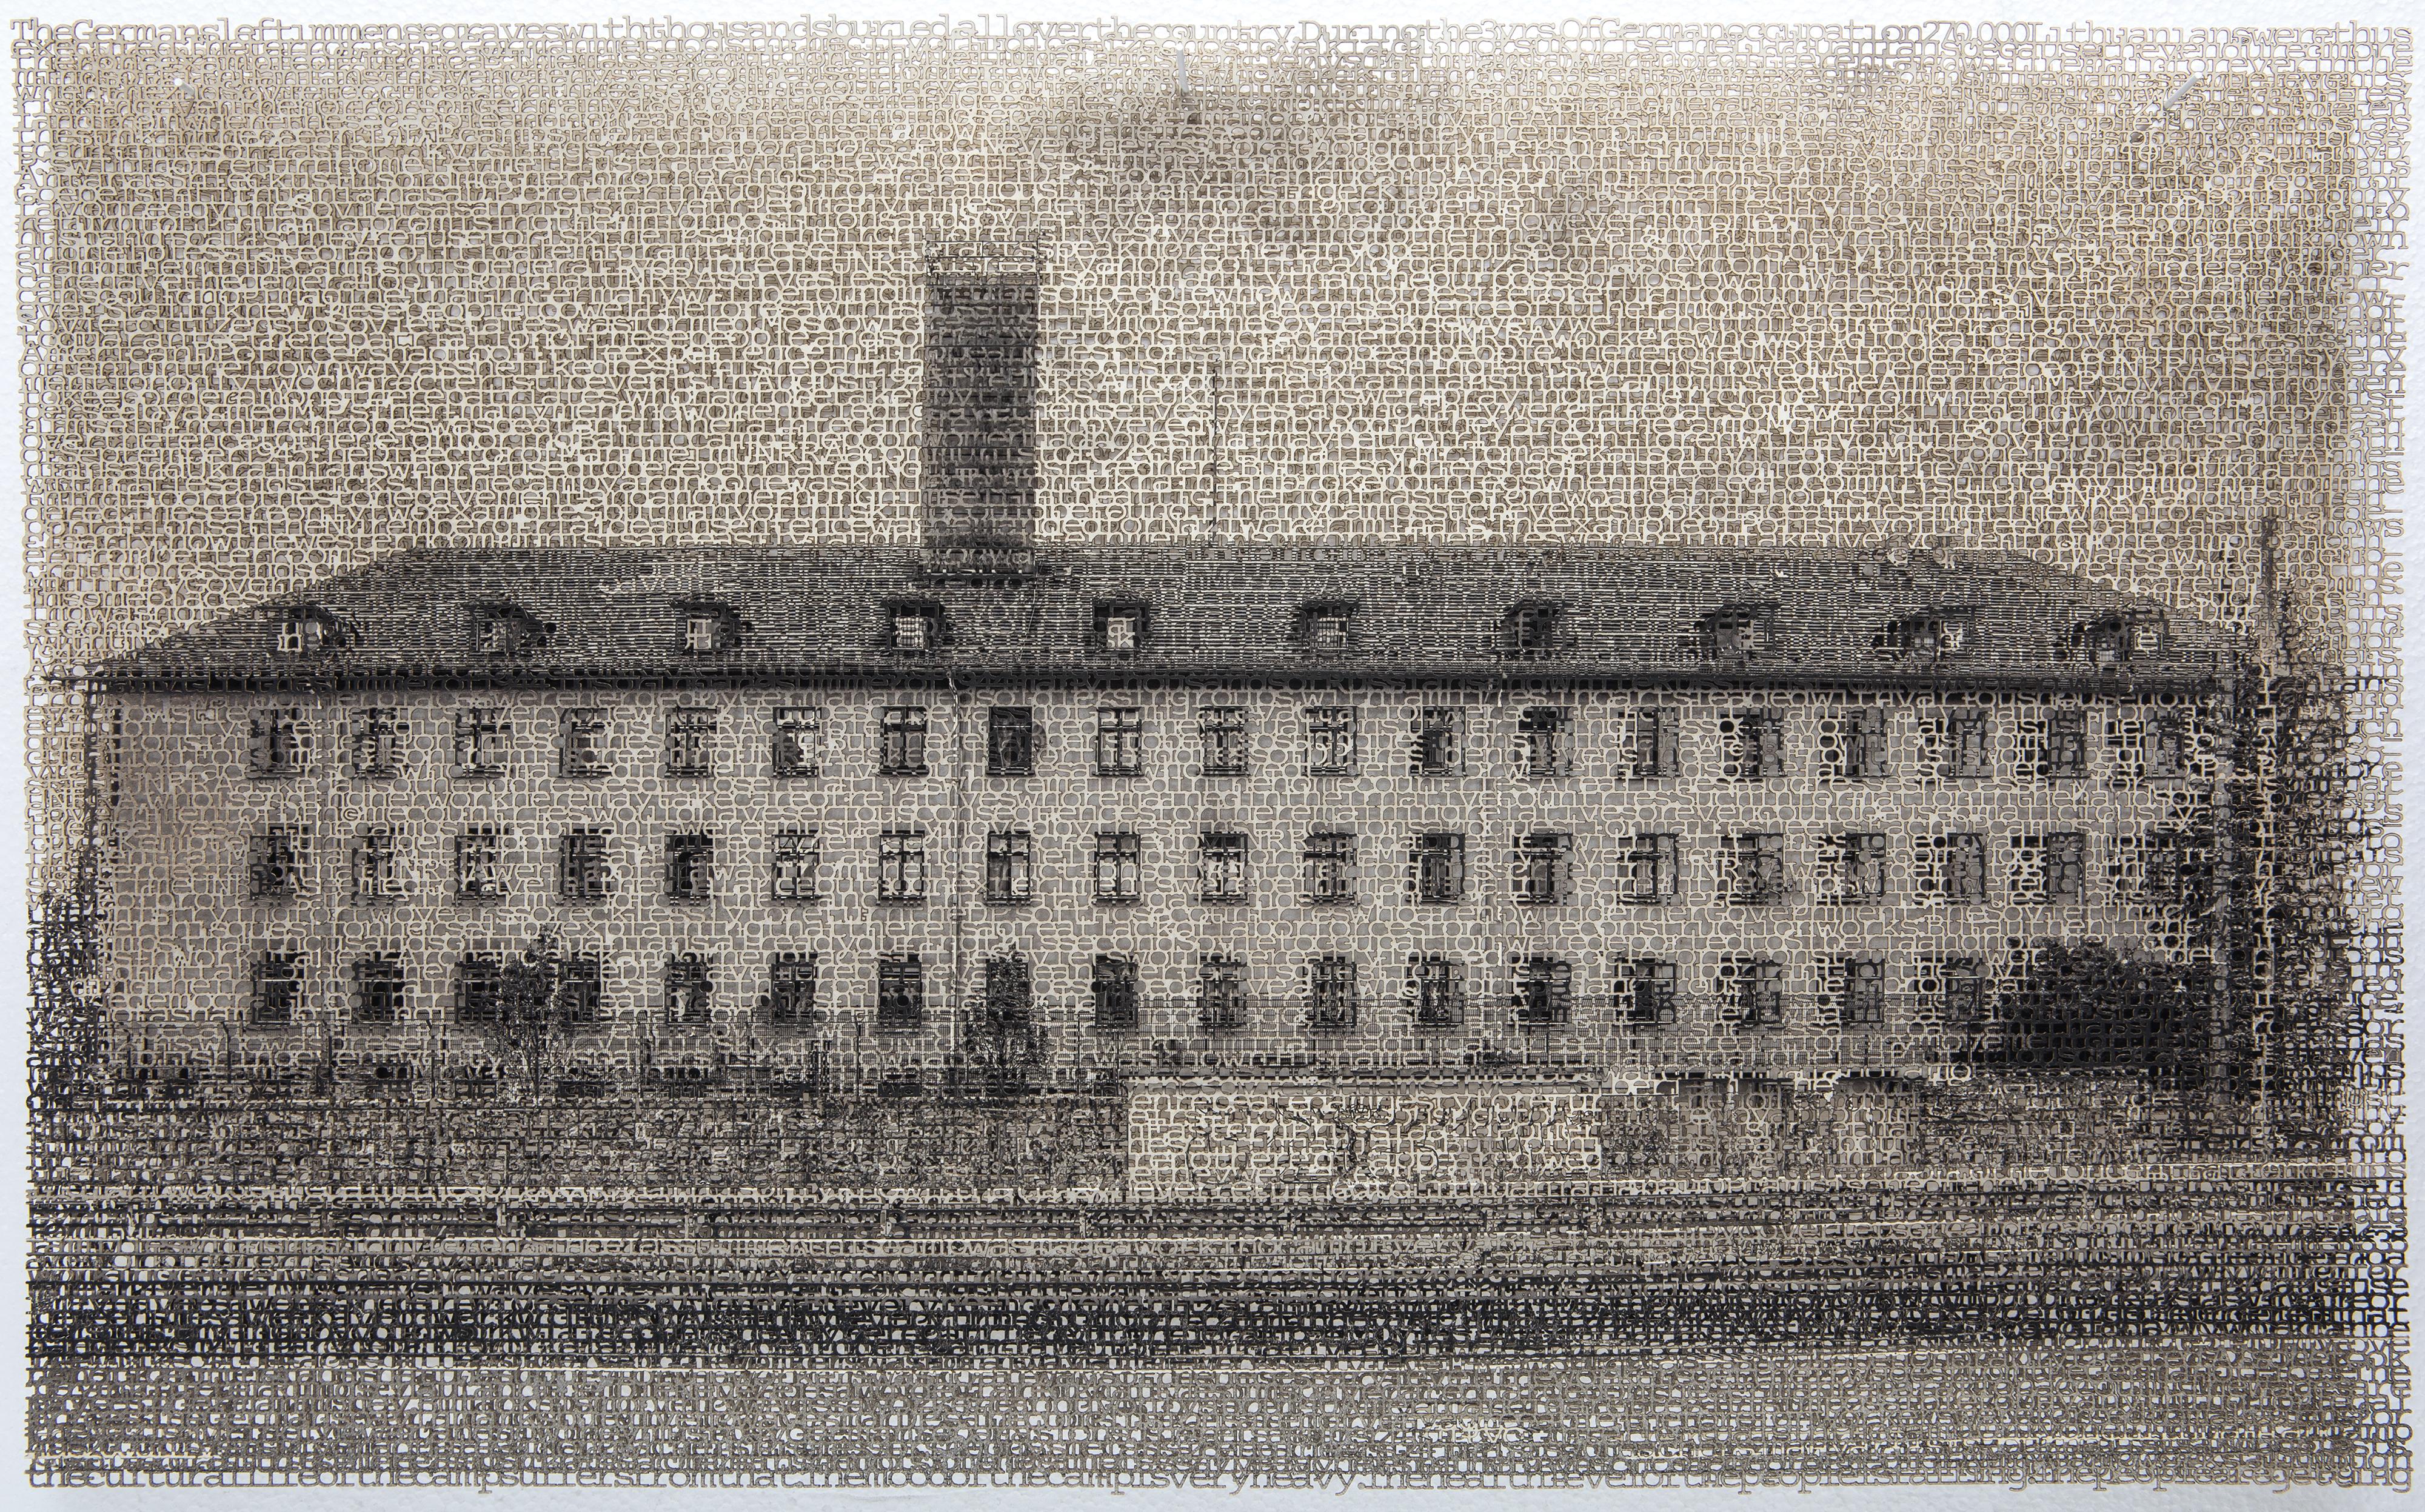 Krista Svalbonas Black and White Photograph - Wurzburg 1, Laser cut archival pigment ink print, signed, numbered, framed 